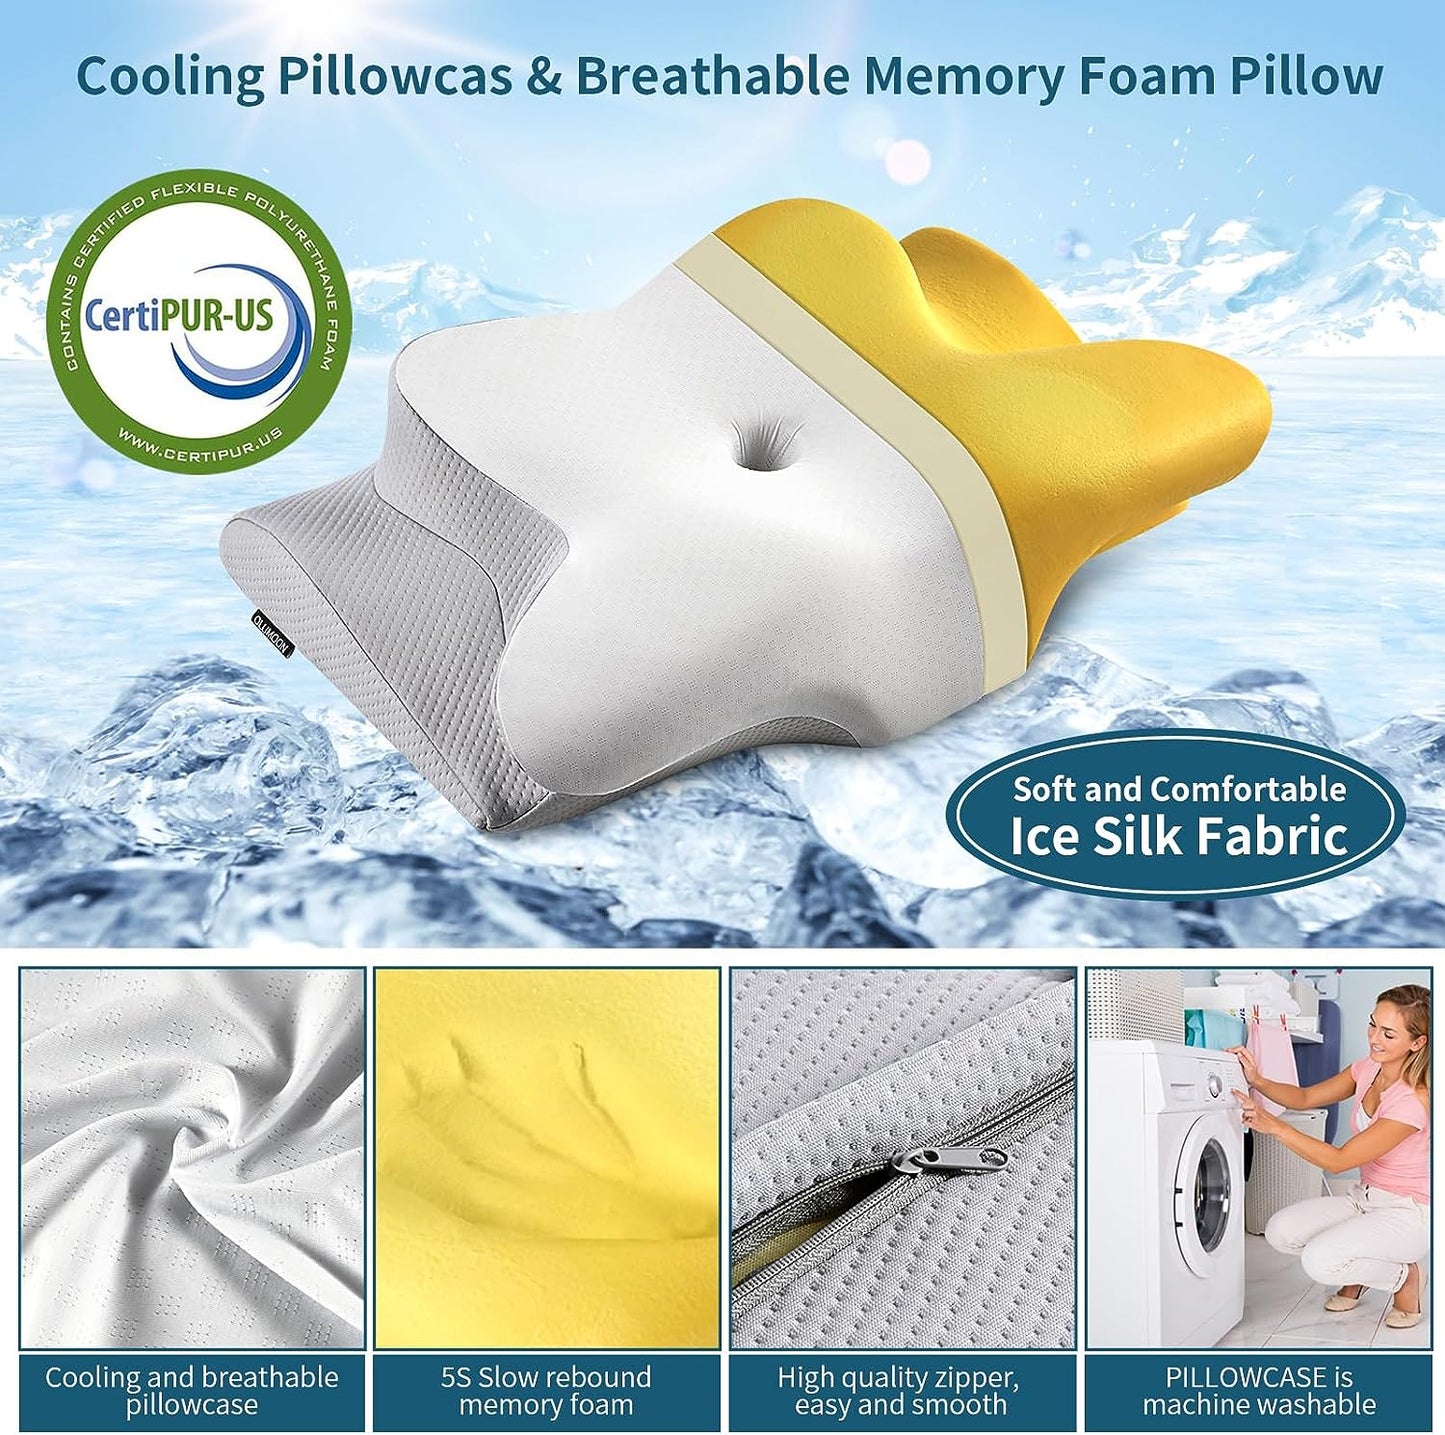 Neck pillows made of cervical memory foam offer relief from discomfort, such as shoulder and neck pain experienced during sleep, helping to improve sleep quality.". 